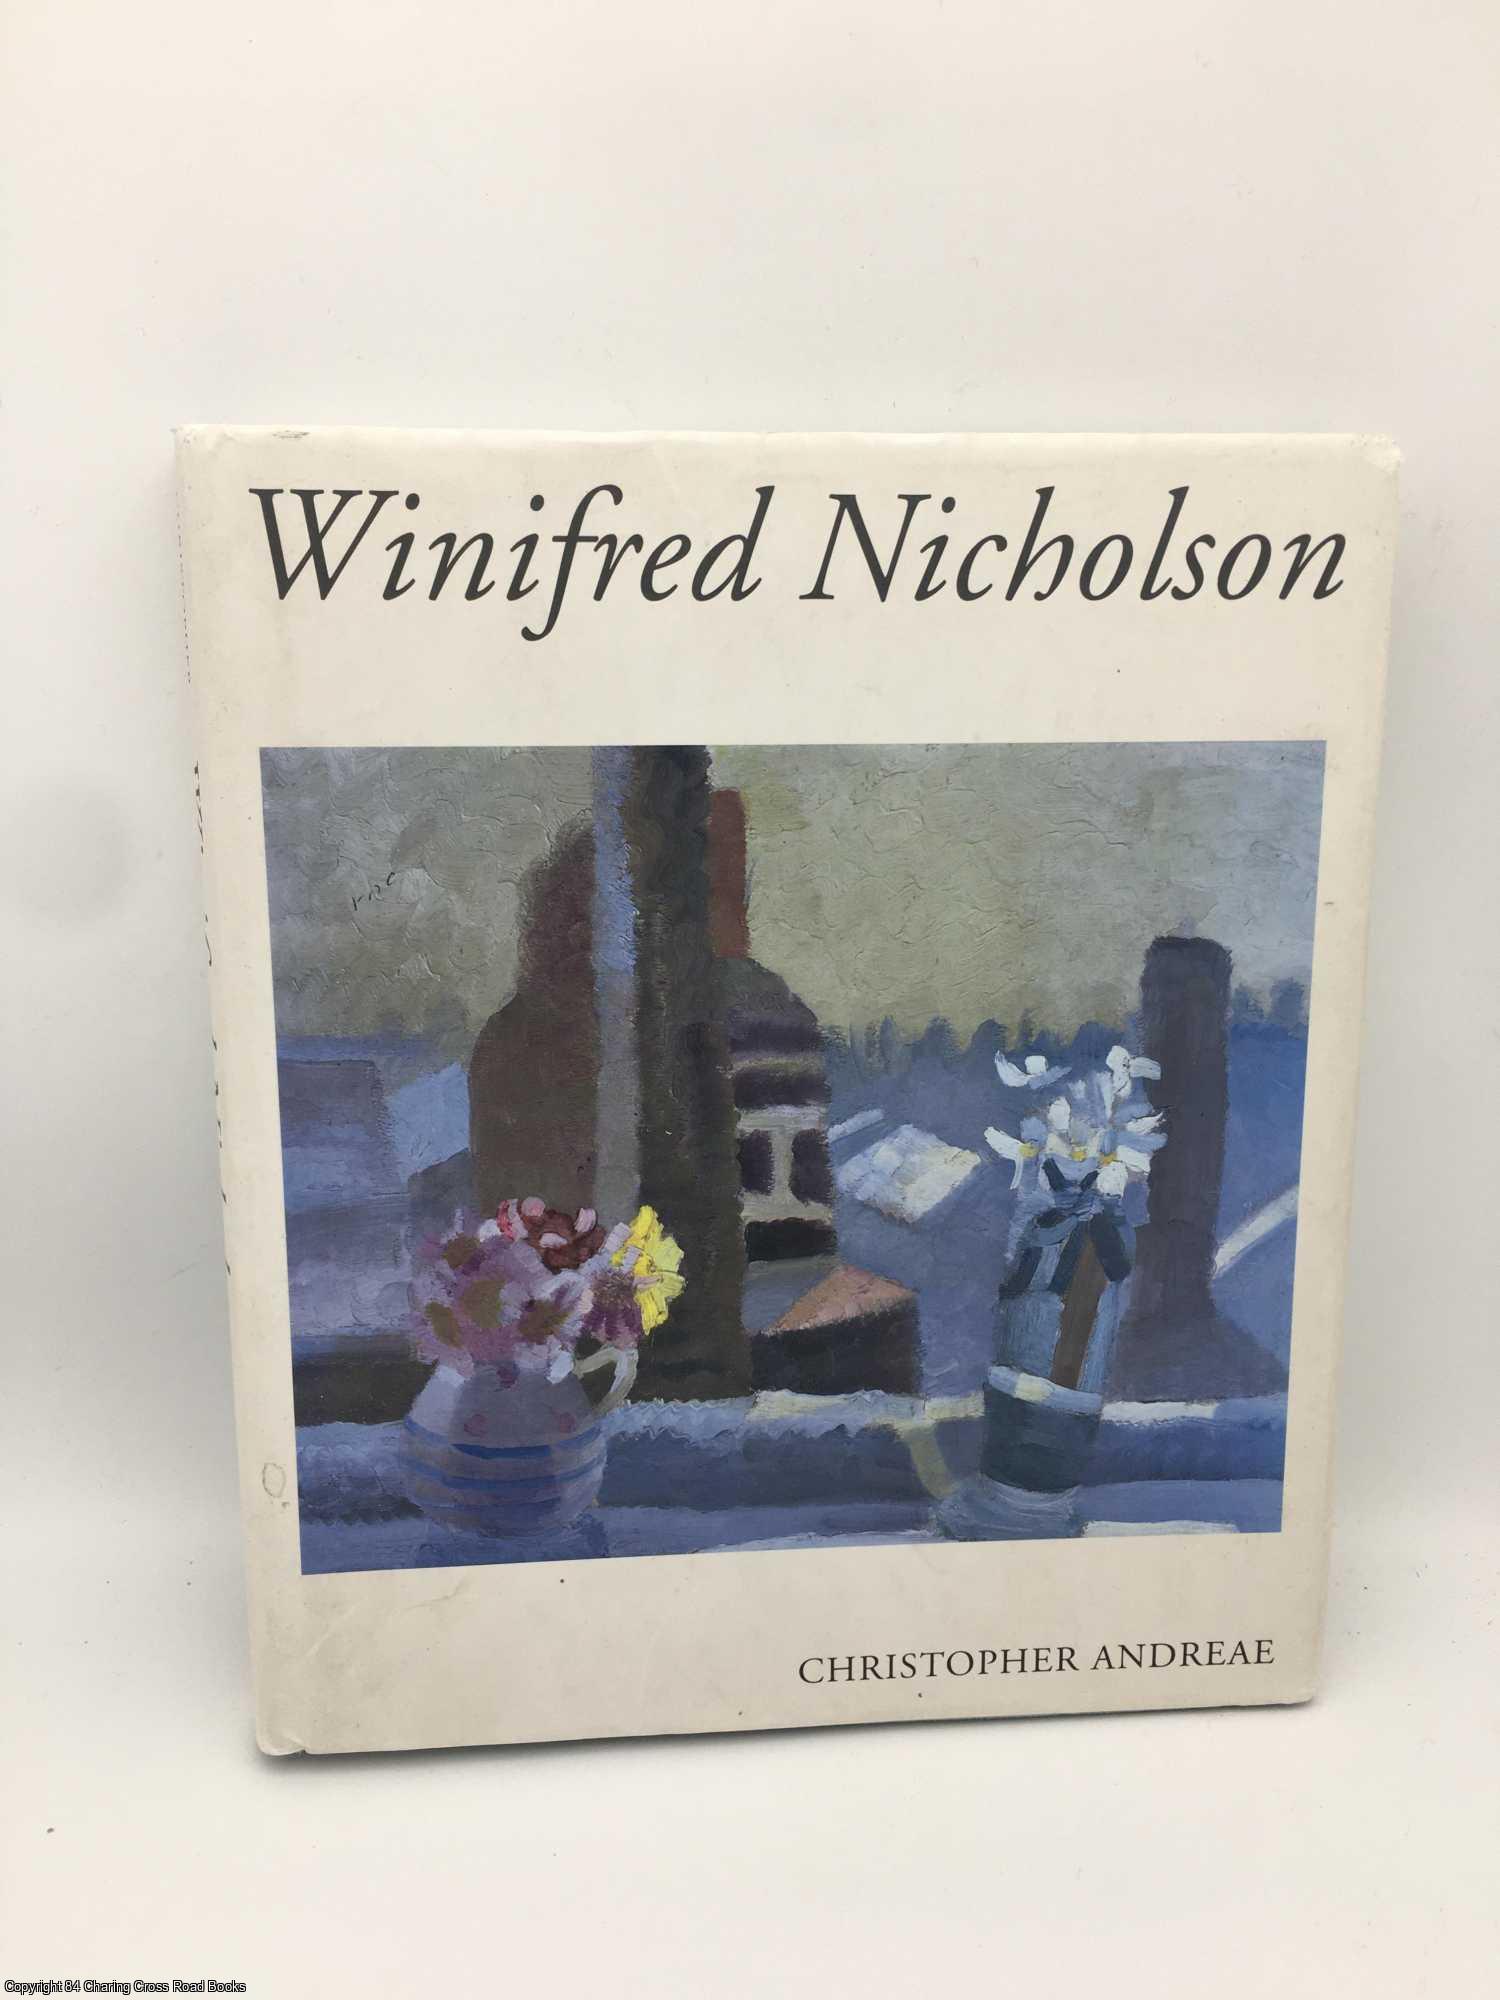 Andreae, Christopher - Winifred Nicholson